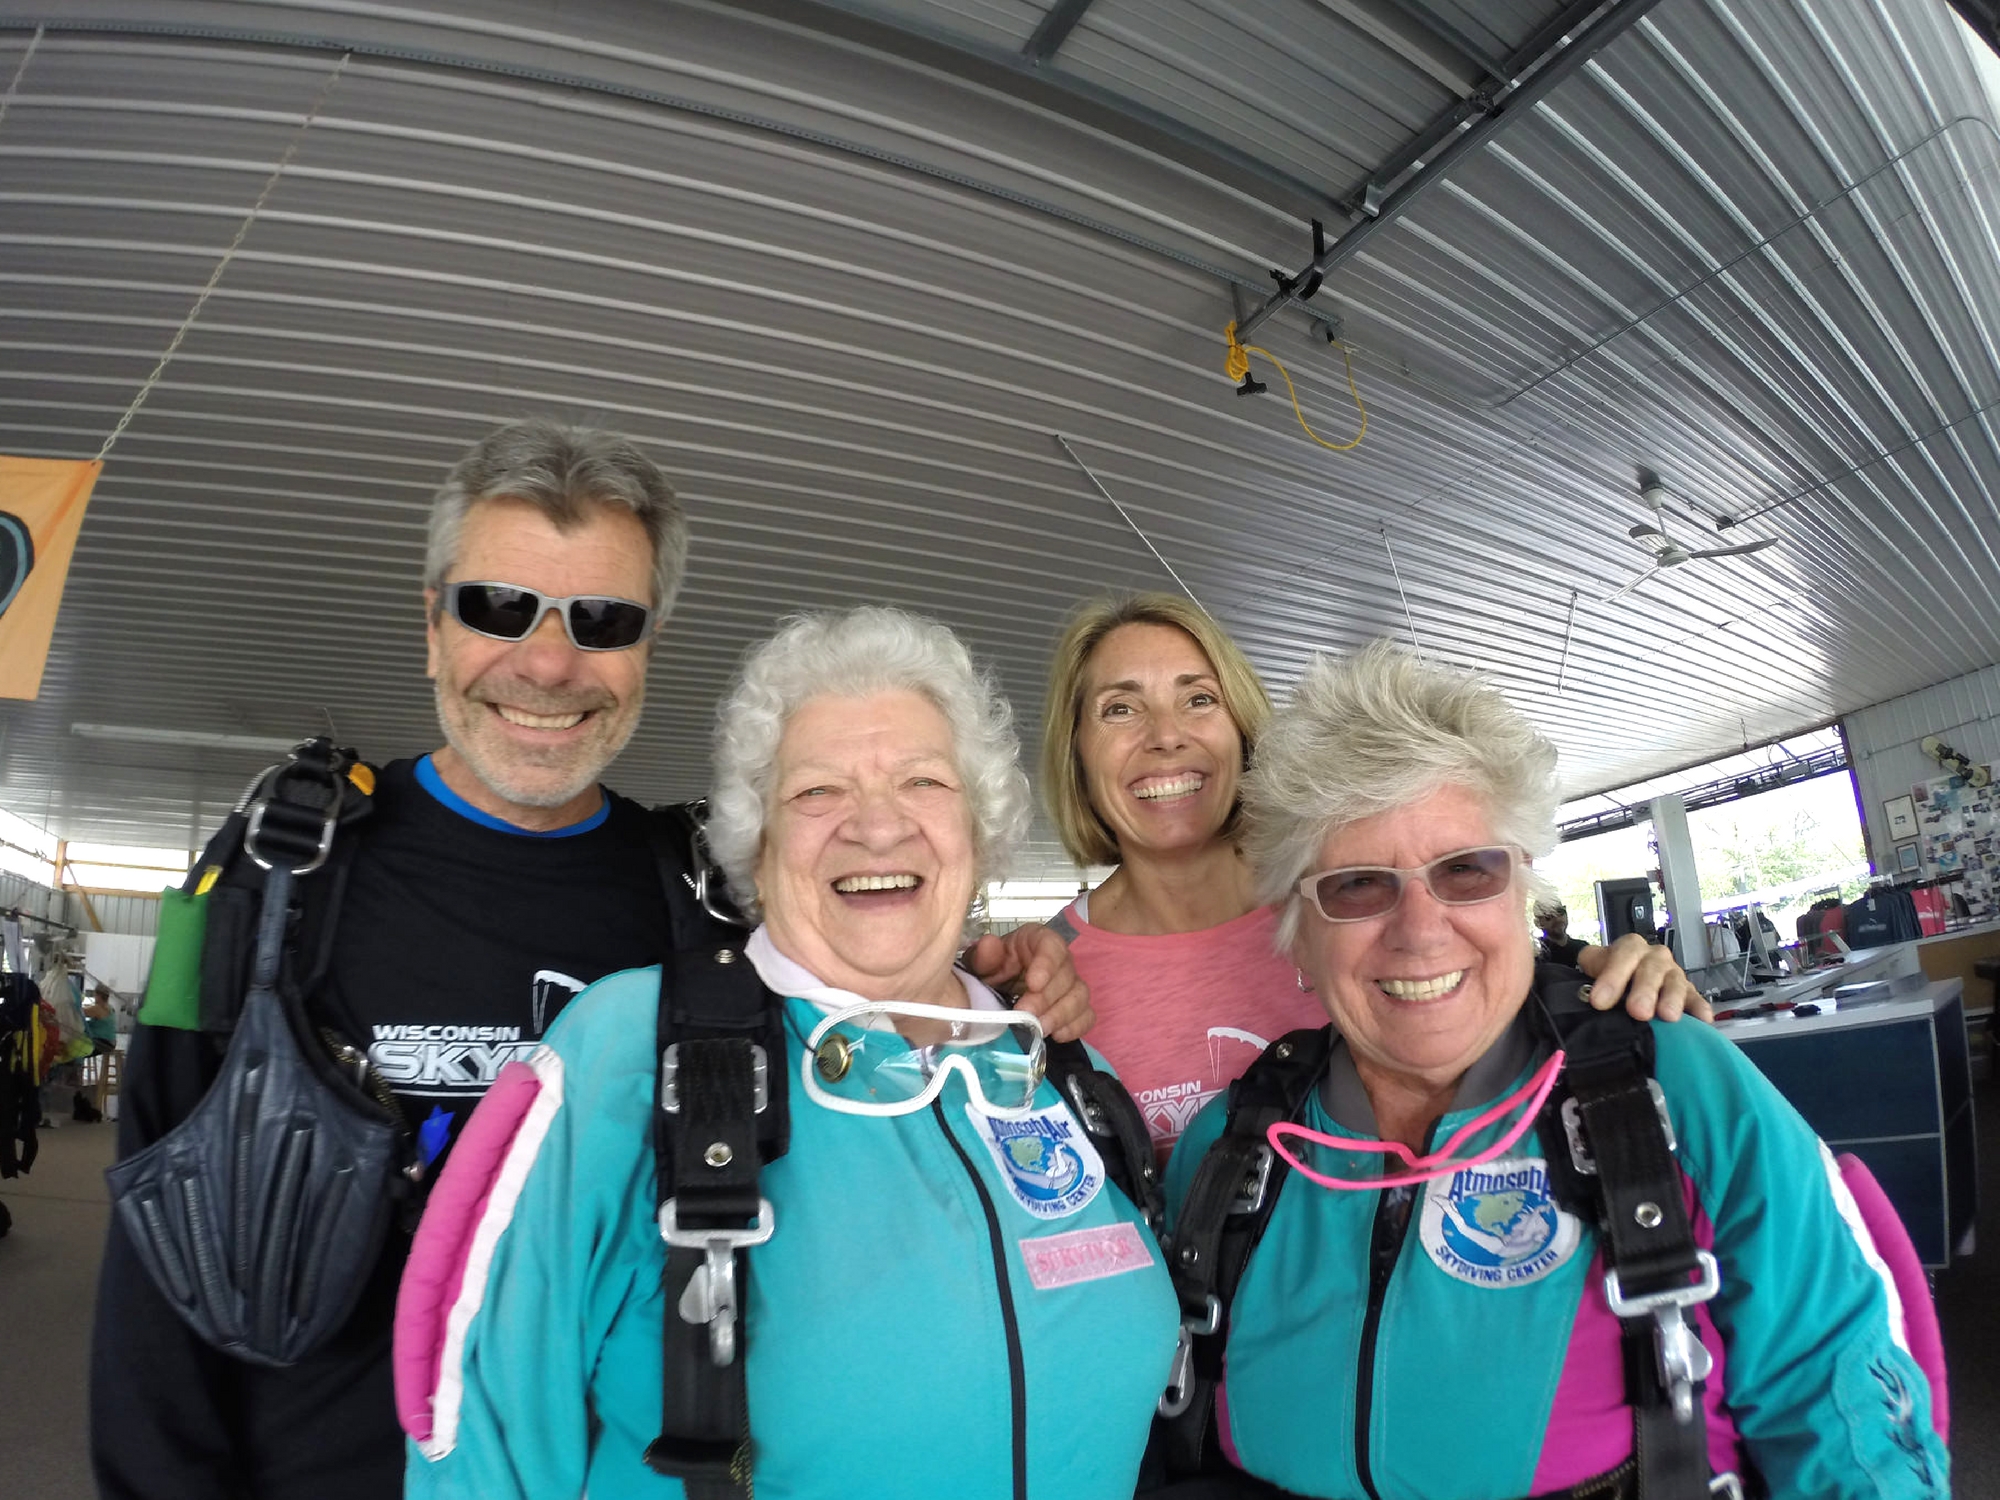 Bo poses with wife Alex and 83 year old skydiver, Anna Mae at Wisconsin Skydiving Center near Milwaukee, WI